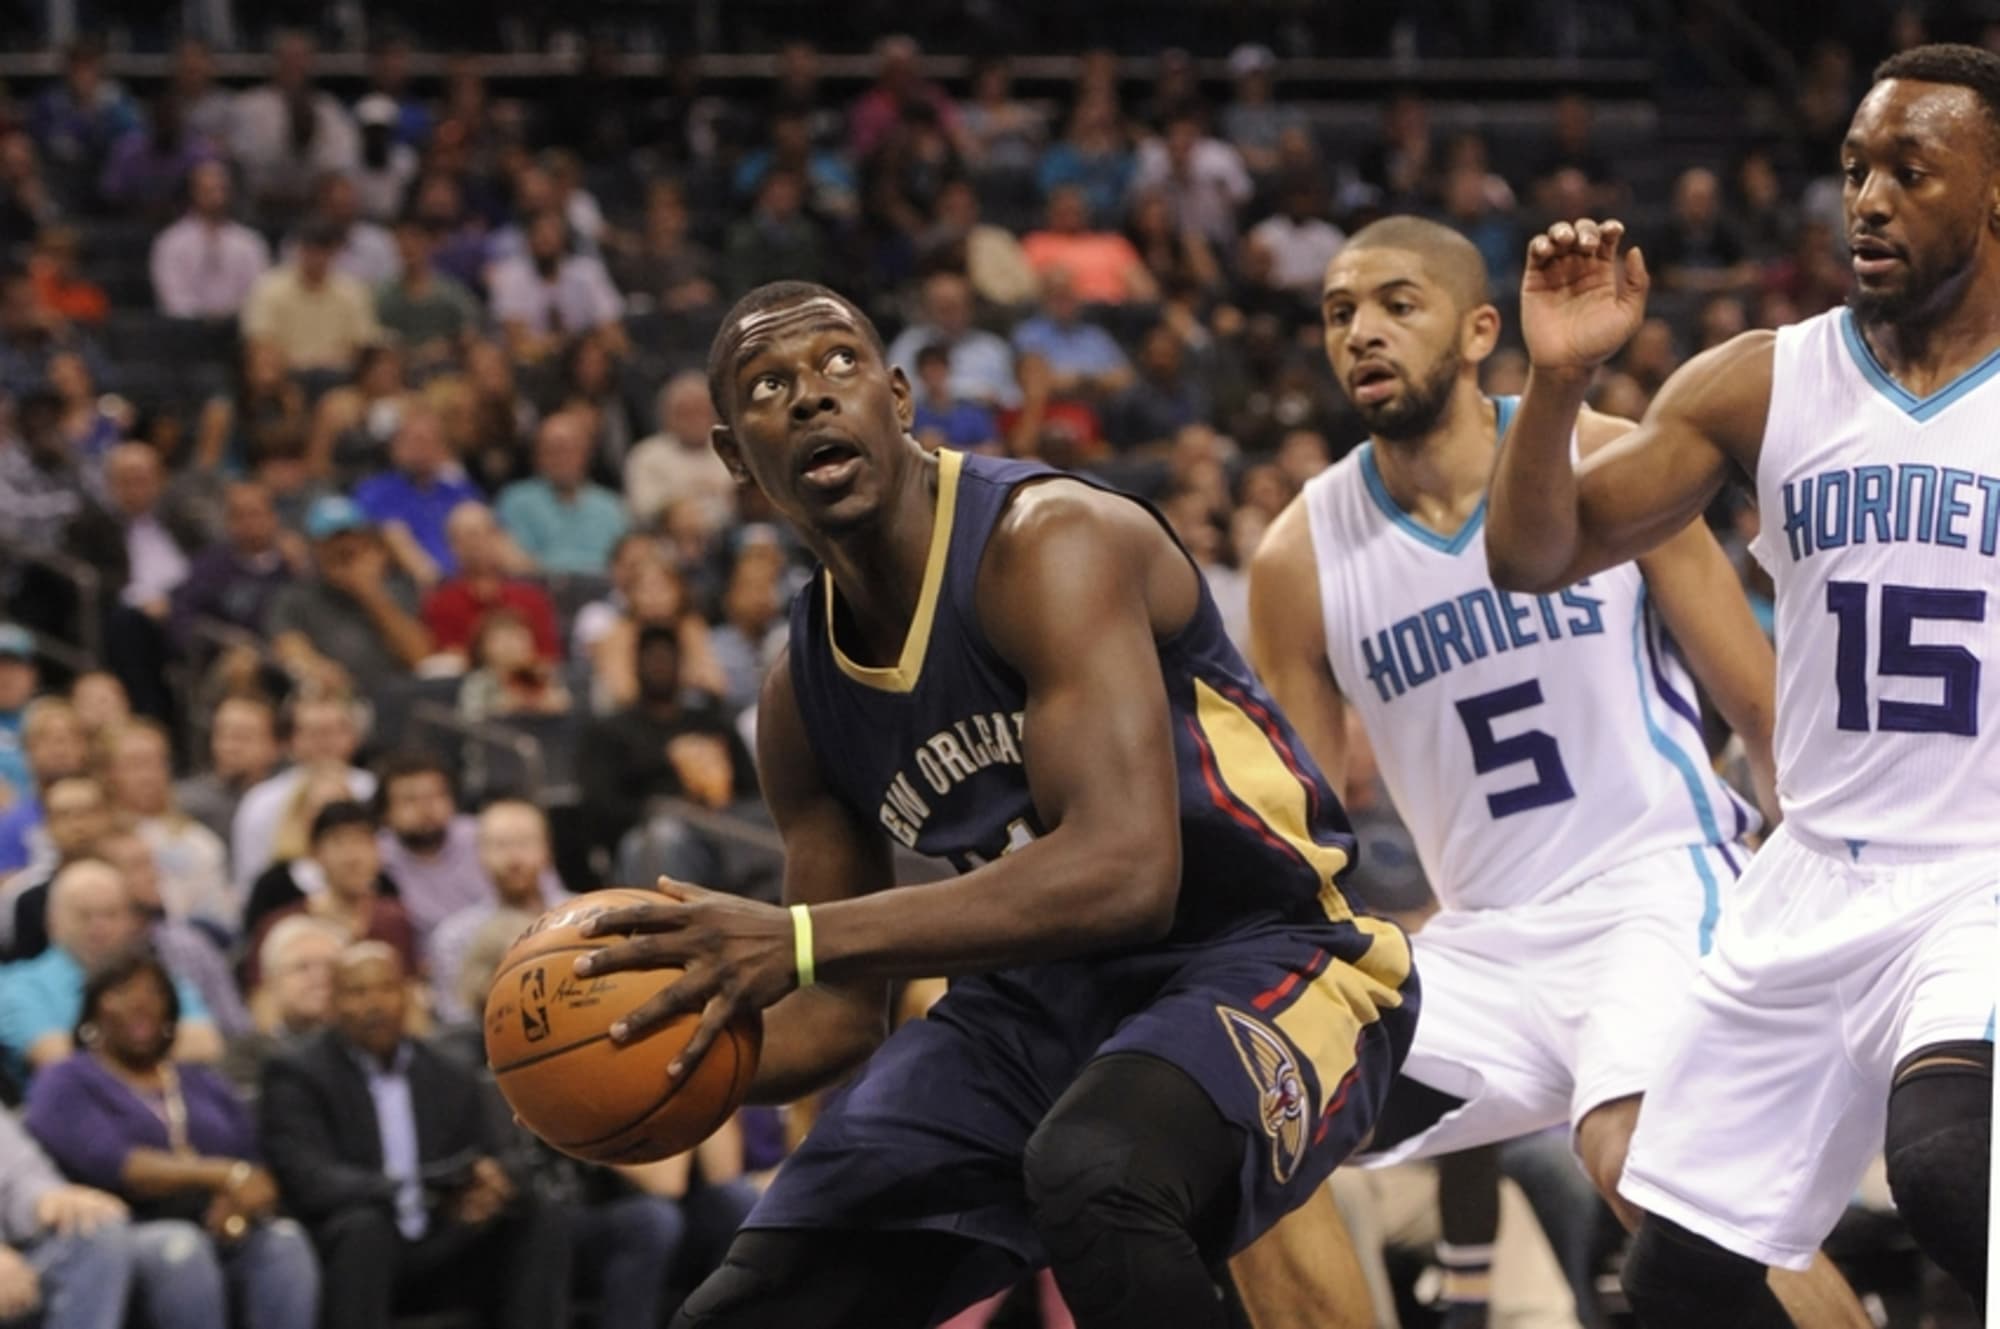 Jrue Holiday's wife has successful surgery to remove benign tumor